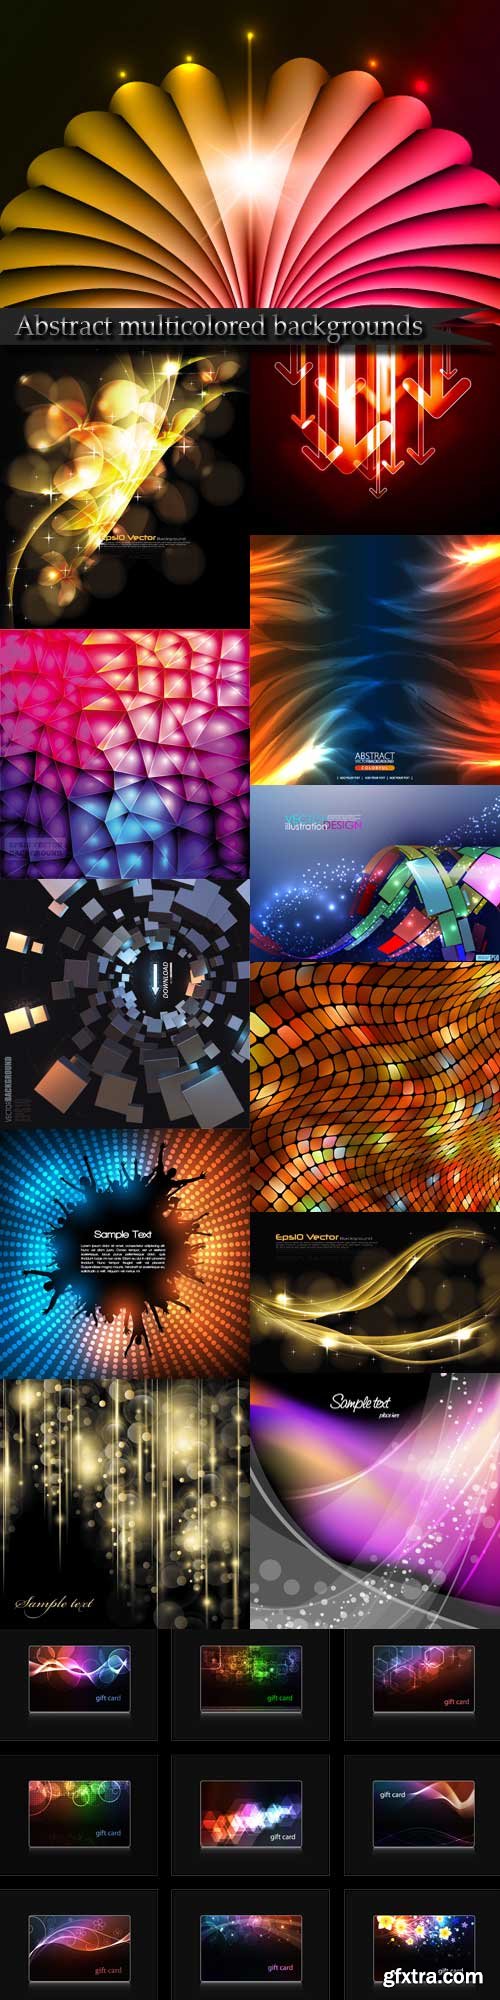 Abstract multicolored backgrounds